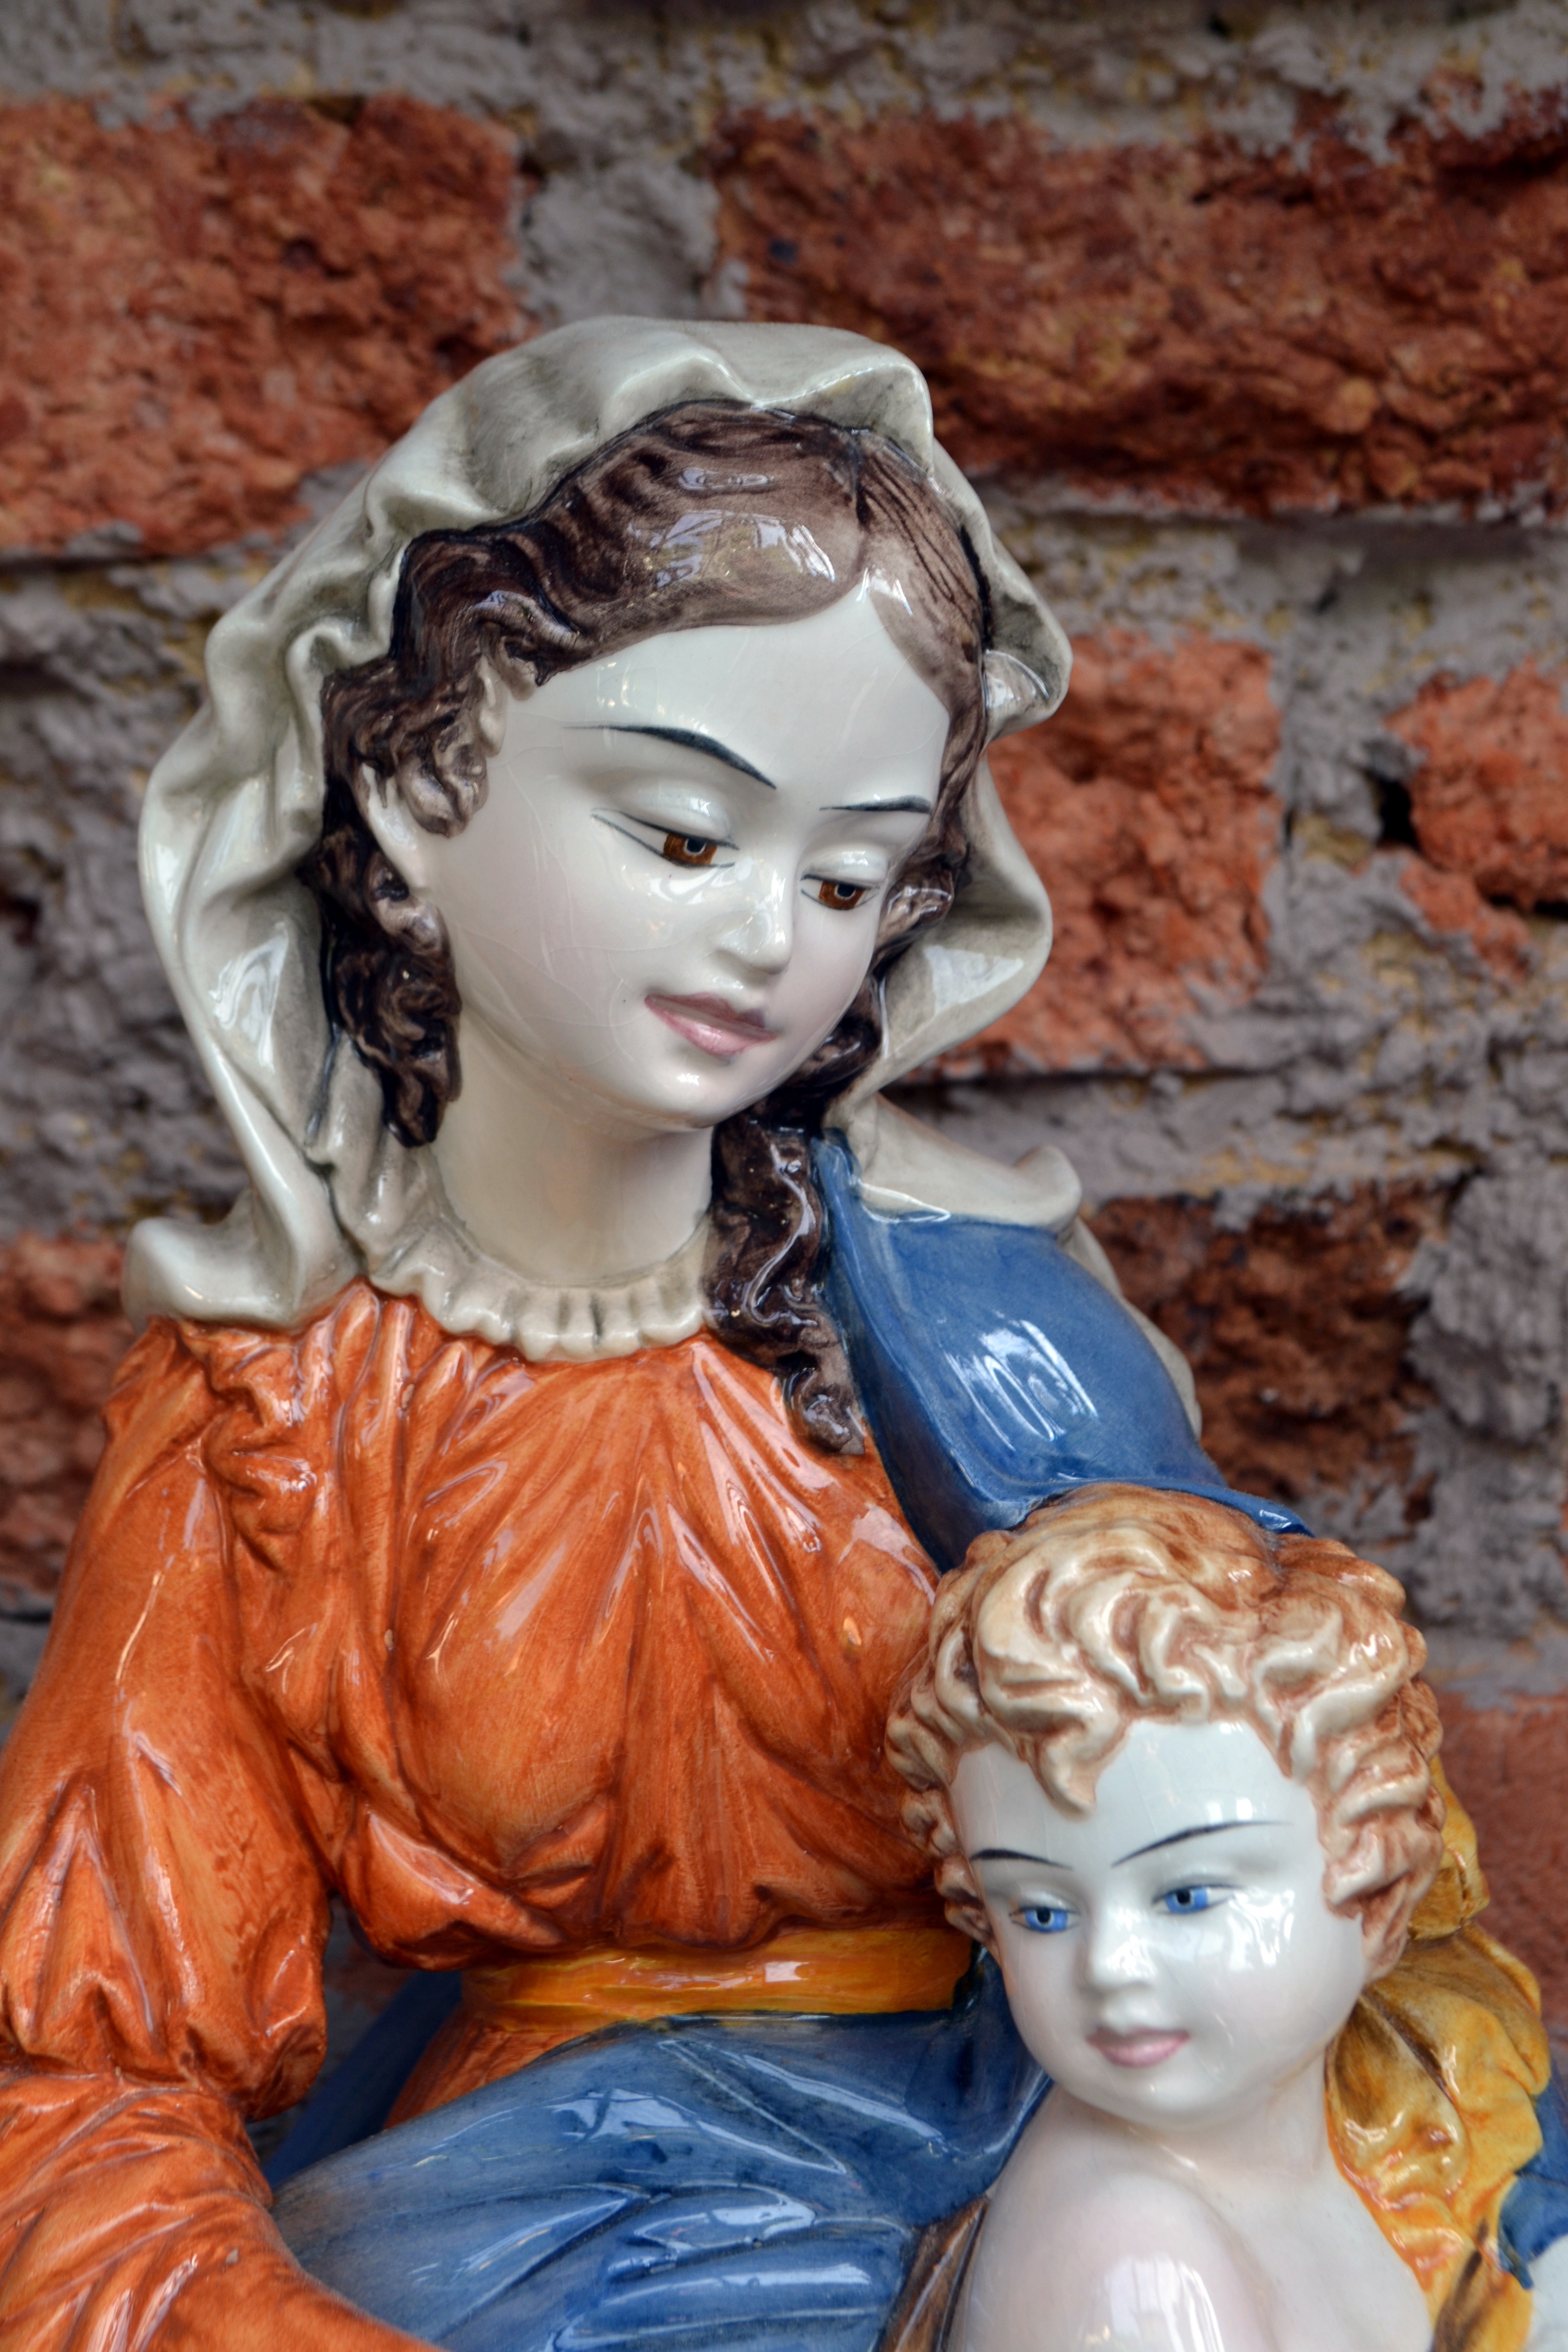 Virgin mary and baby jesus statue photo